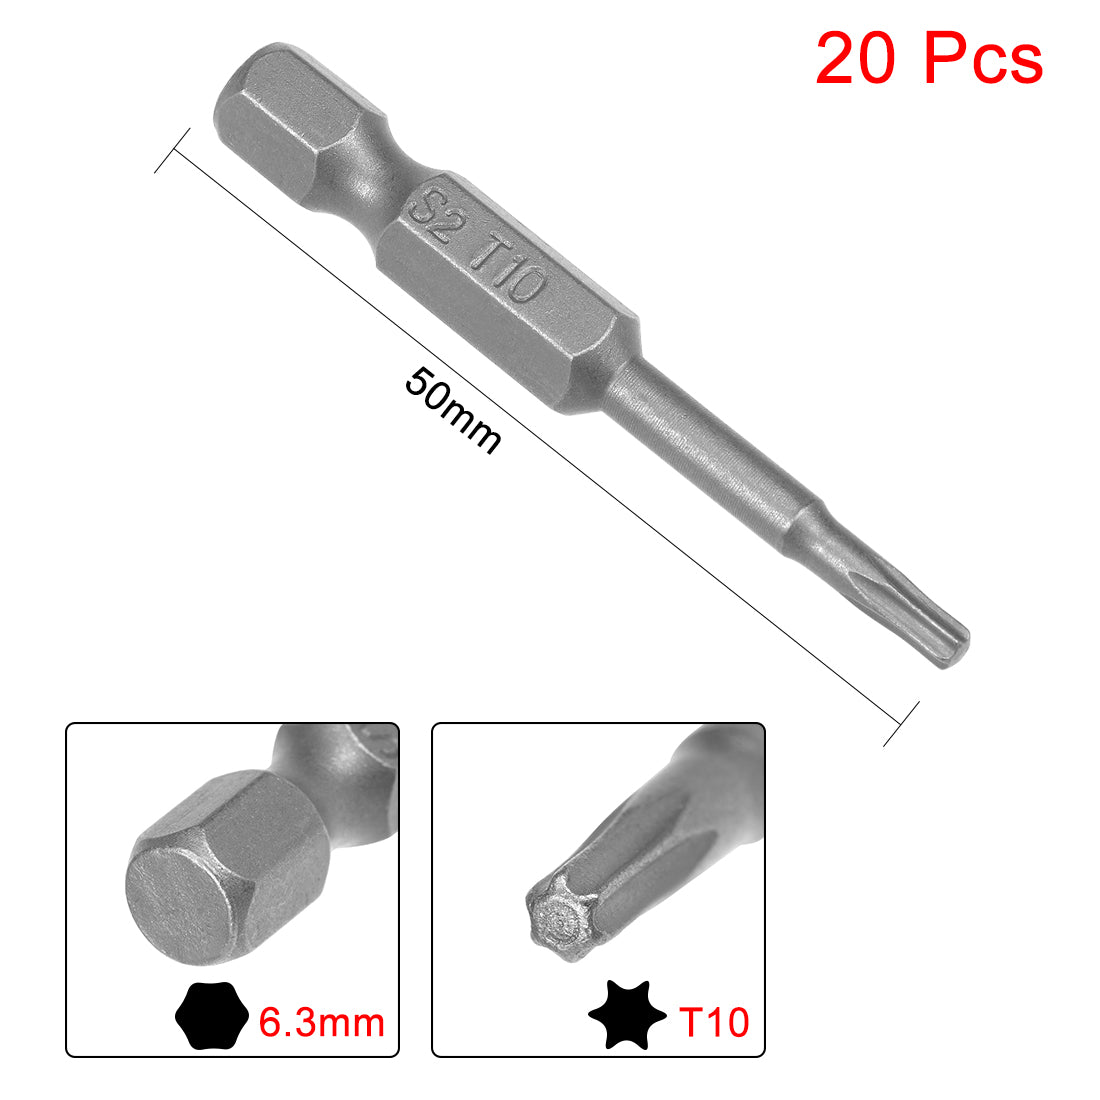 uxcell Uxcell Magnetic Torx Screwdriver Bits, Hex Shank S2 Power Tools